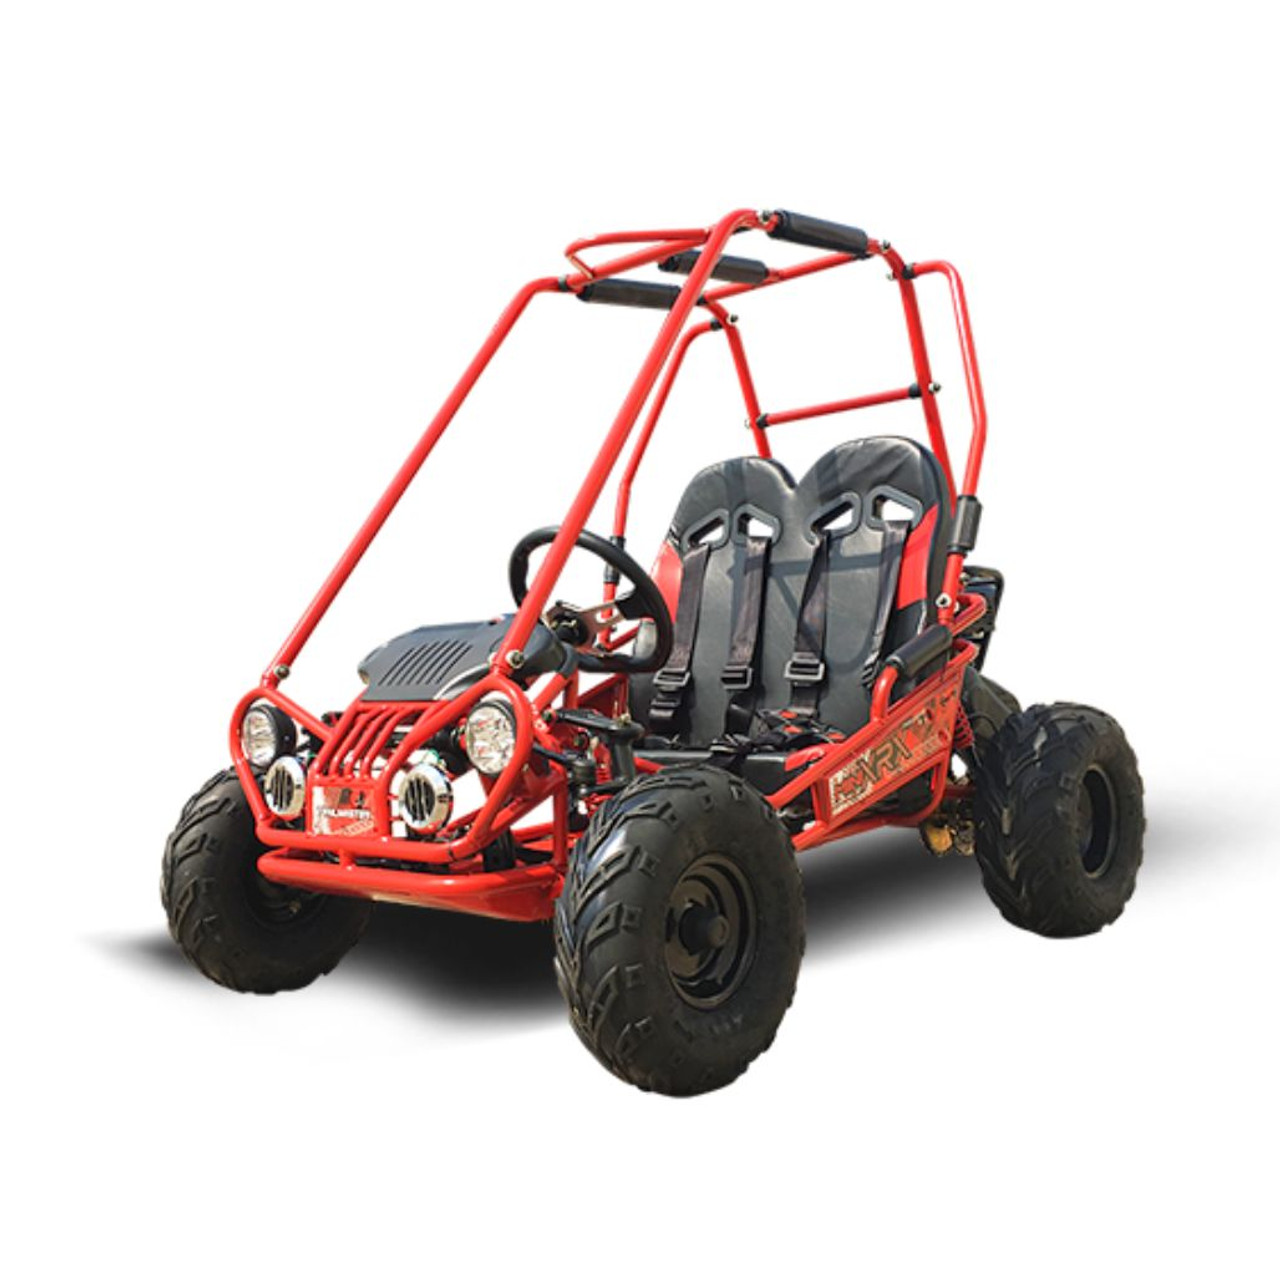 OVERSTOCK Inventory Clearance Sale! TrailMaster Mini XRX KIDS Go Kart  w/REVERSE-ages 4-9 Fully Assembled-Black, Dave Kingston's Karts